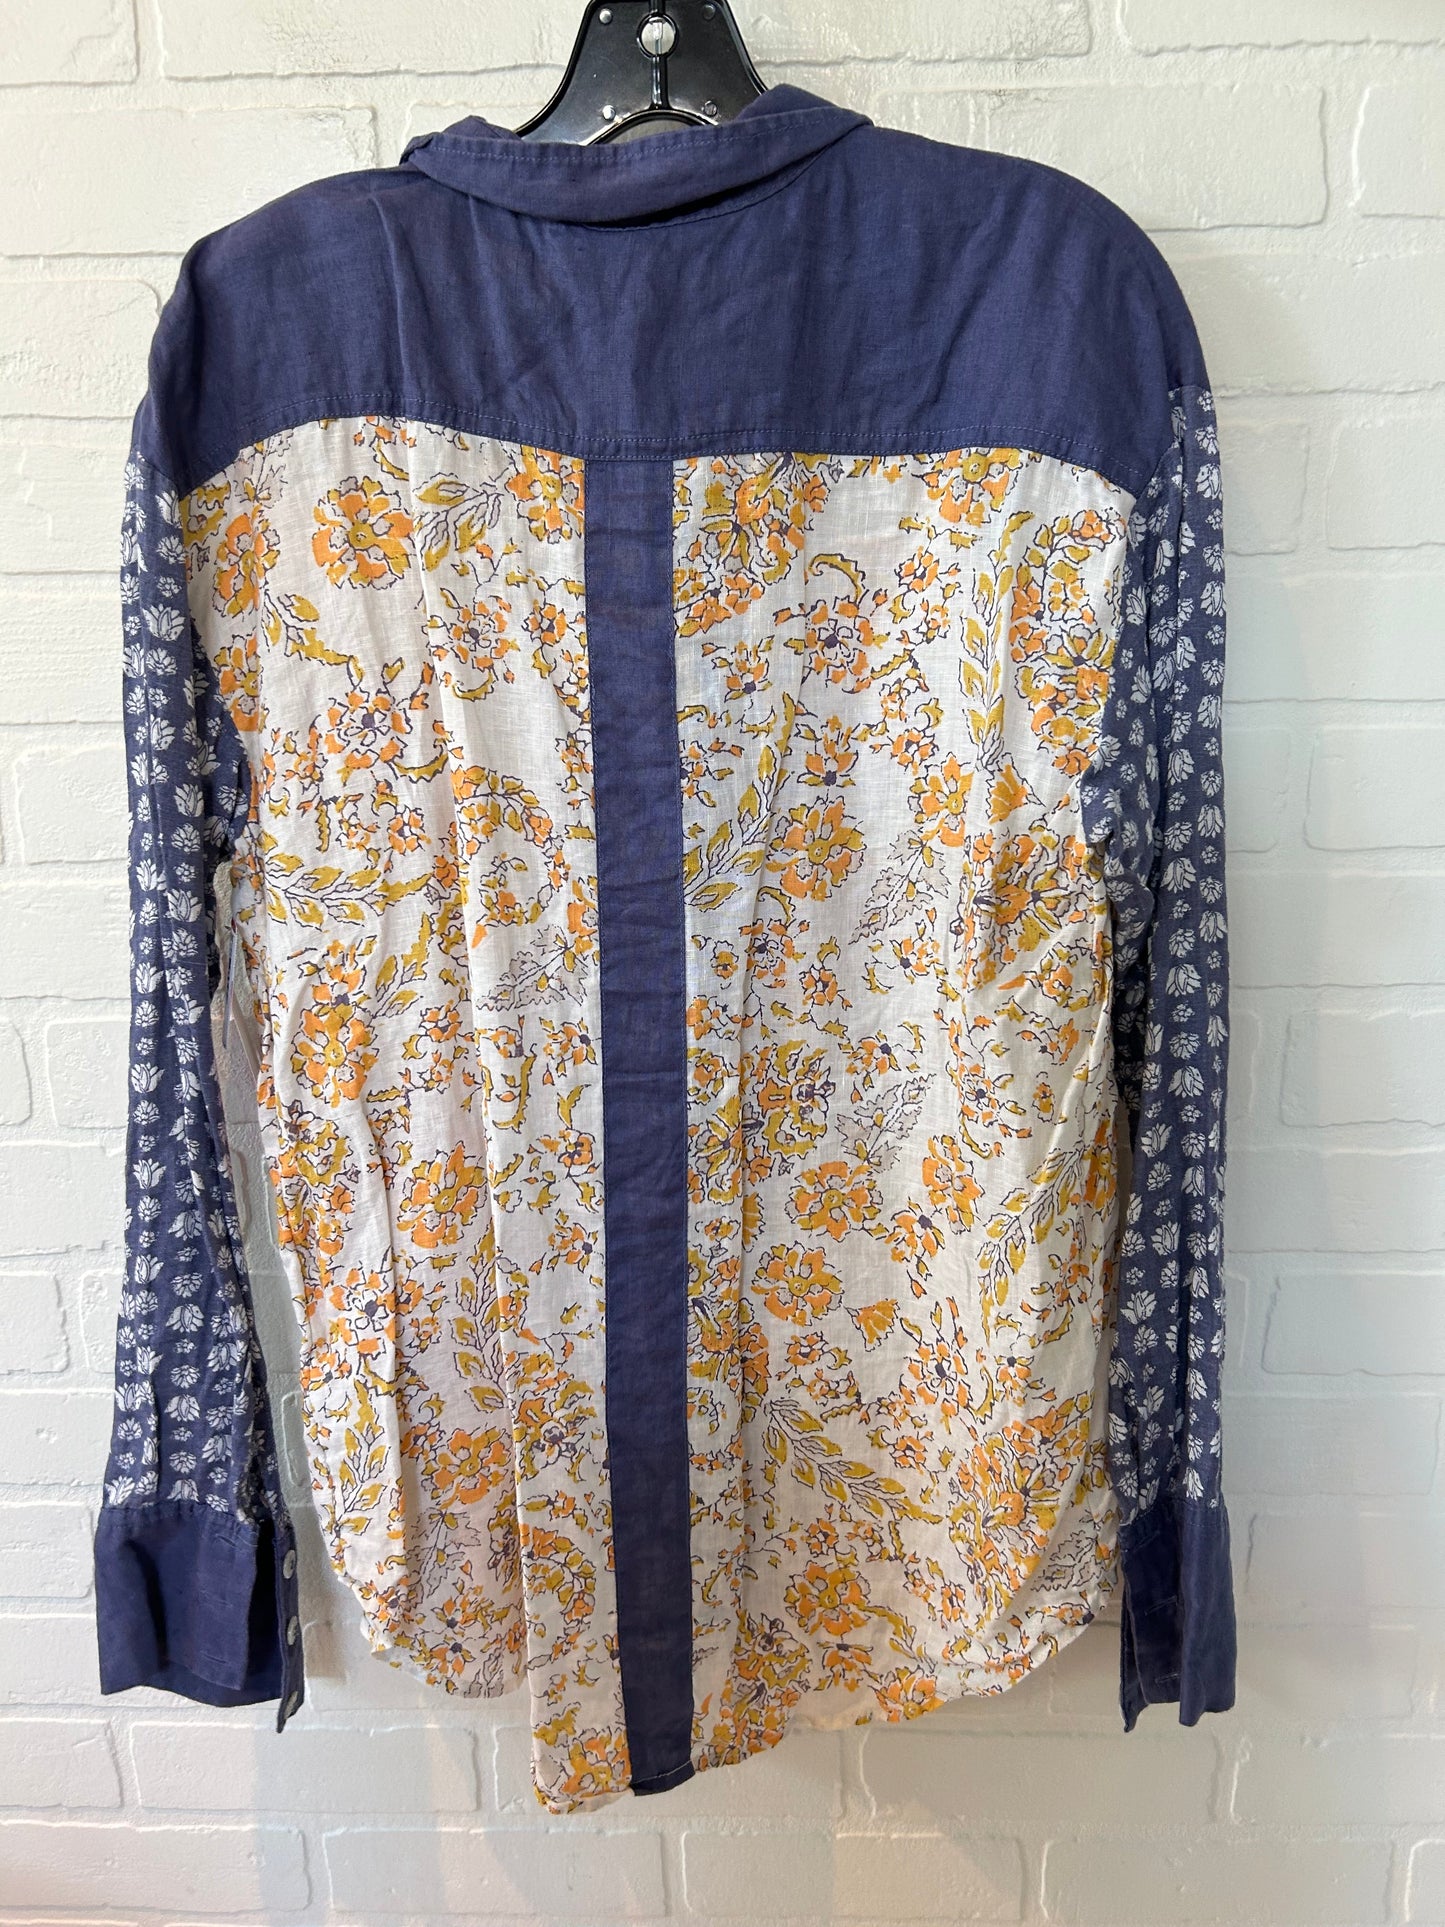 Blue & Yellow Top Long Sleeve We The Free, Size L